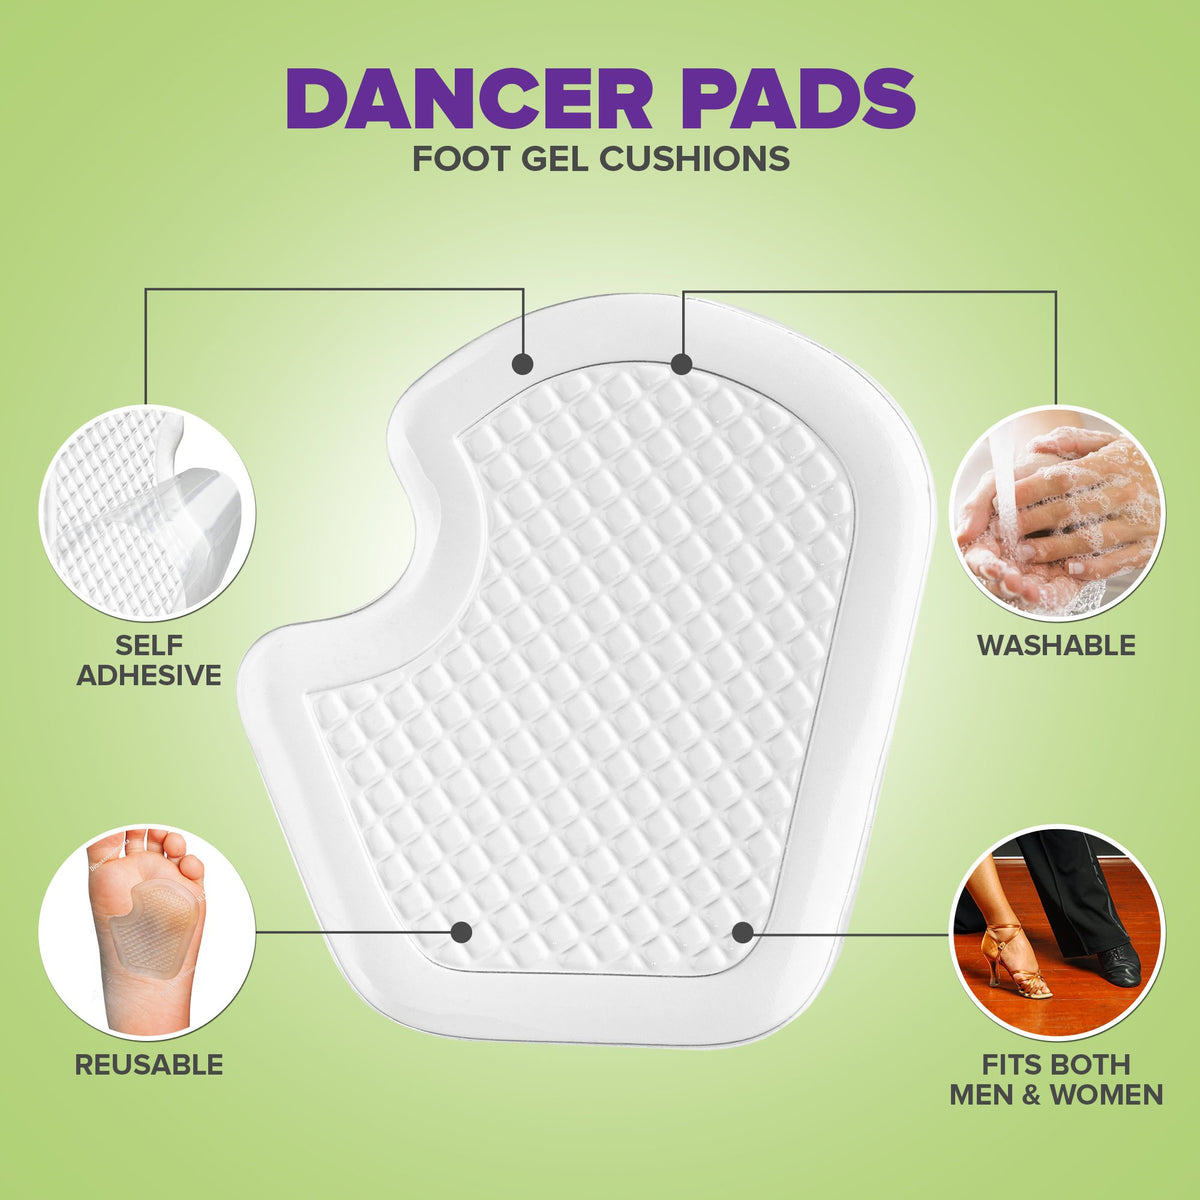 Mars Wellness Dancers Pads for Feet – Premium Gel Cushion Foot Pad Designed to Help Protect & Relieve Metatarsal, Sesamoid & Ball of Foot Pain – Strong Adhesive Backing – 2 Pairs